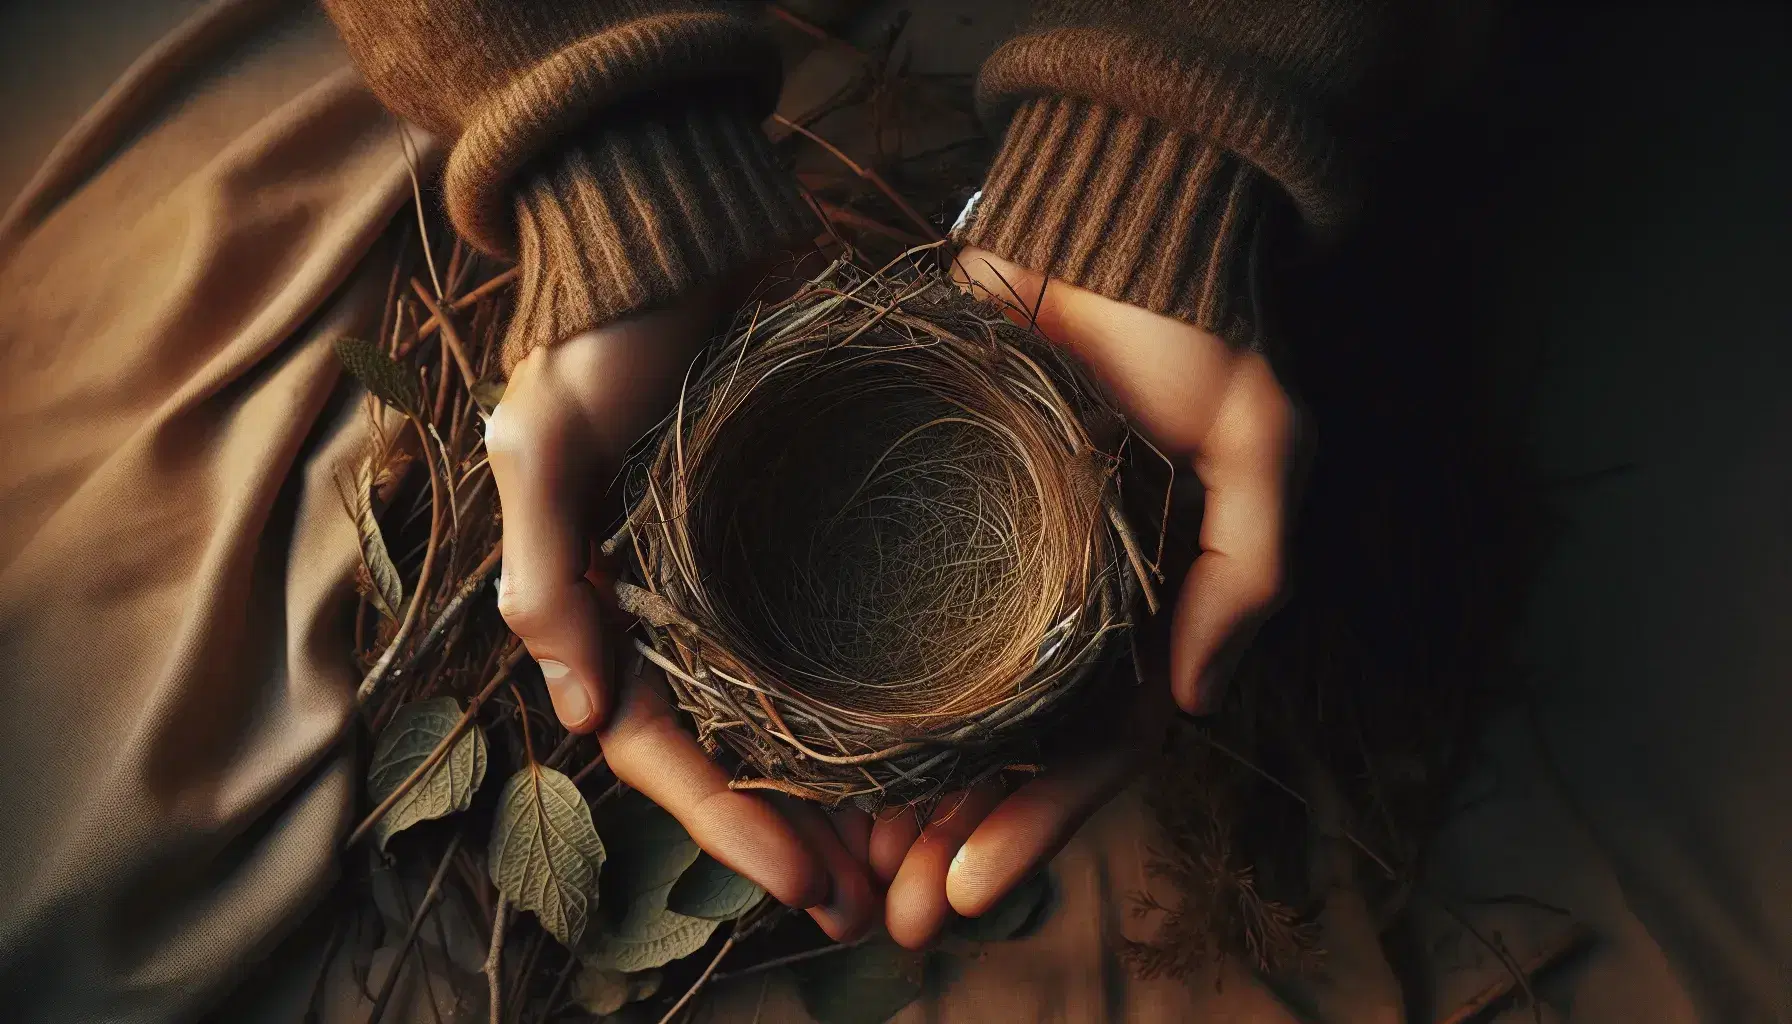 Human hands delicately supporting an empty bird's nest entwined with branches and leaves, on blurred earth-toned background.